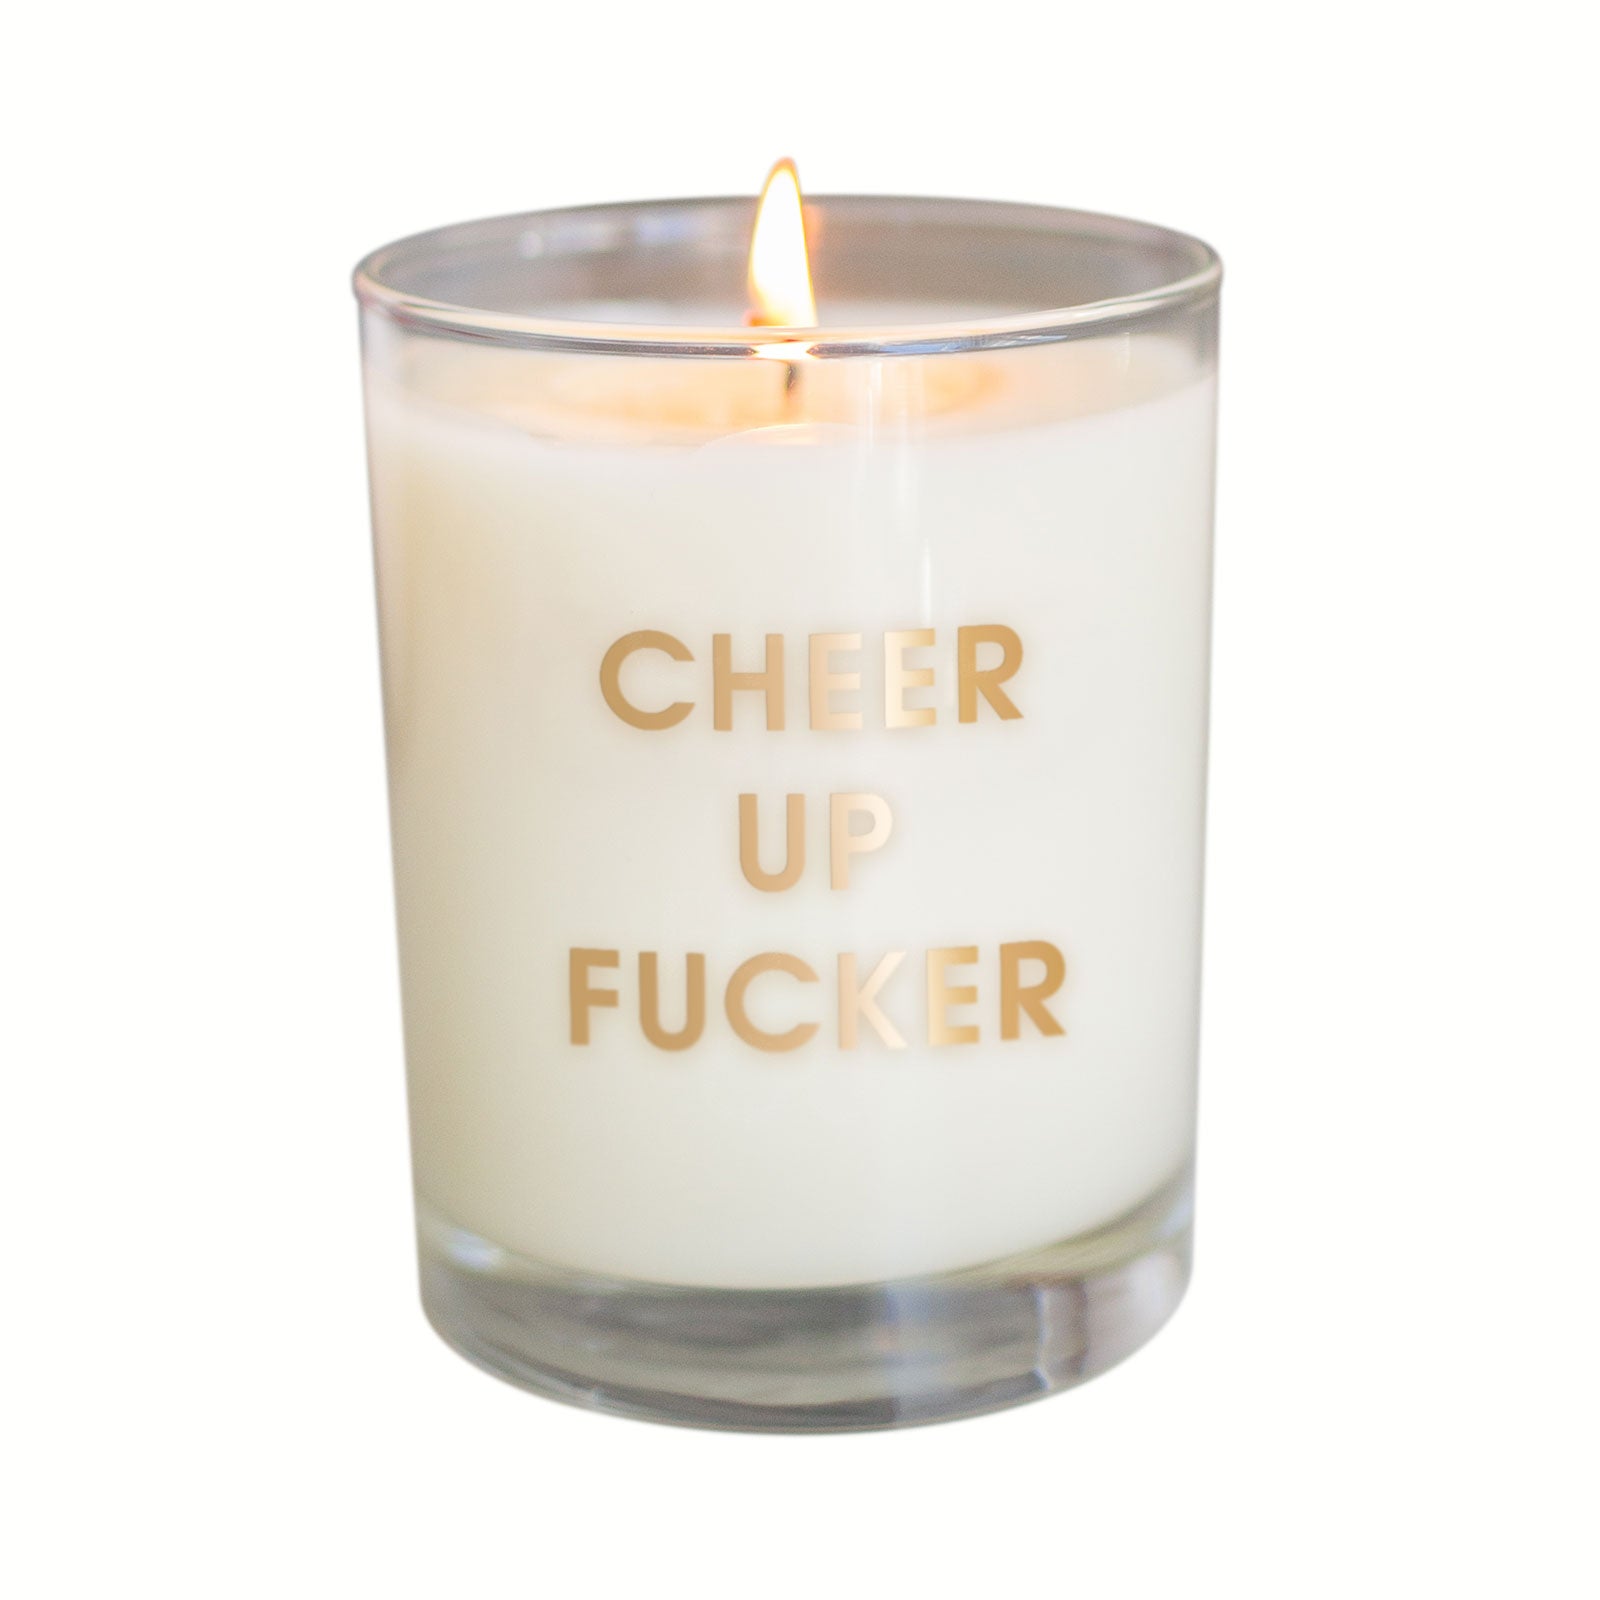 Cheer Up Fucker Candle - Gold Foil Rocks Glass (Slightly Imperfect)